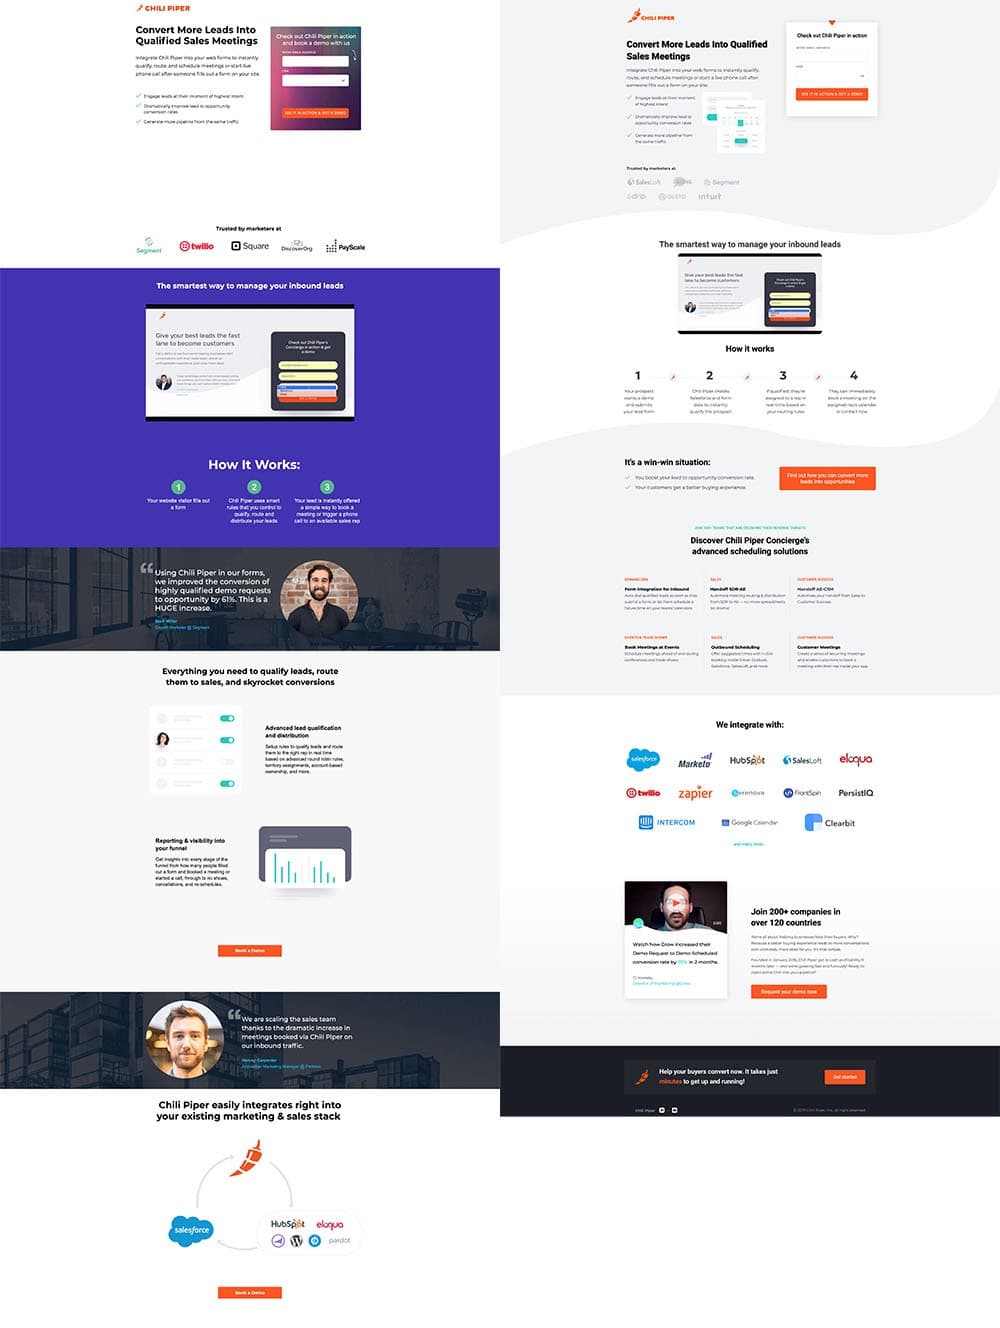 Old landing page on the left; new on the right.